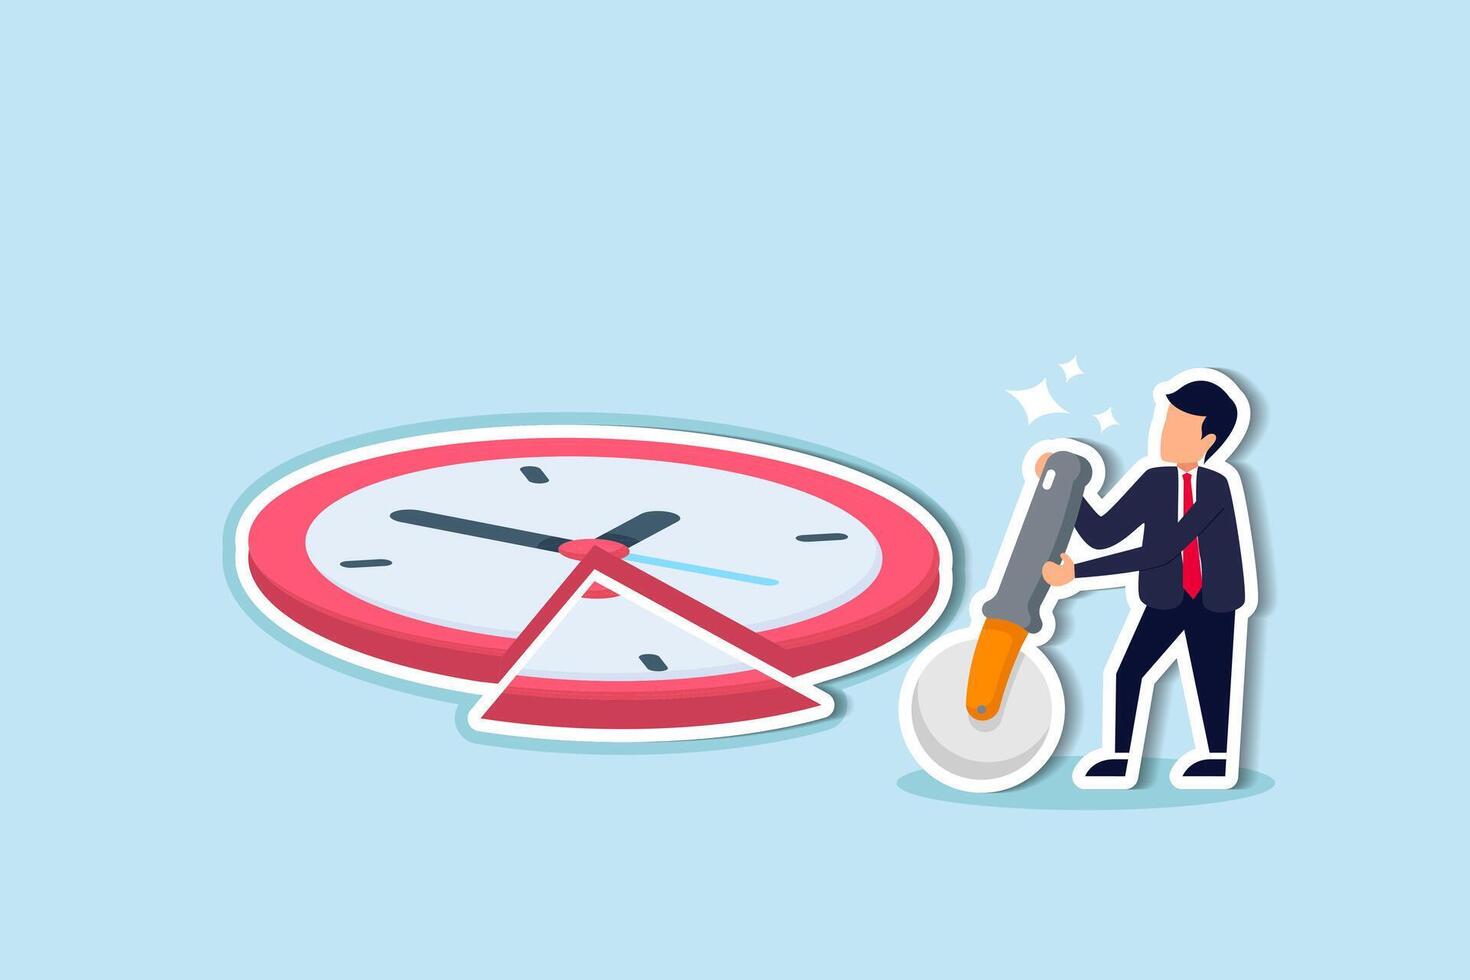 Time allocation, manage limited time to optimize outcome, project management or efficiency and productivity concept, smart businessman cut clock face with pizza cutter metaphor of time management. vector